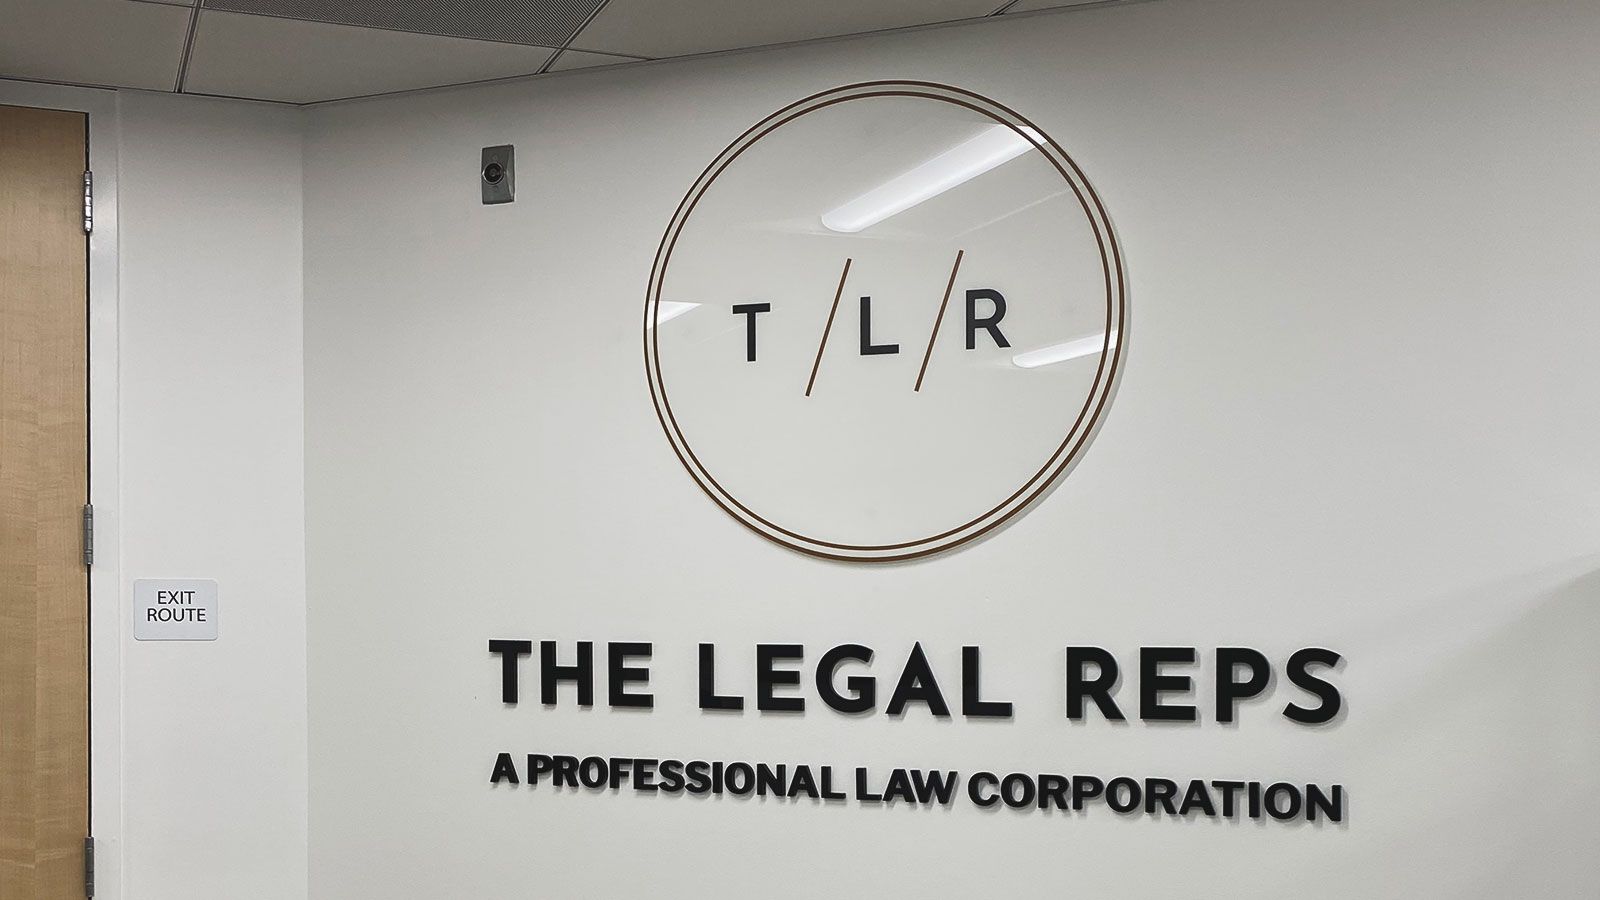 the Legal reps acrylic sign